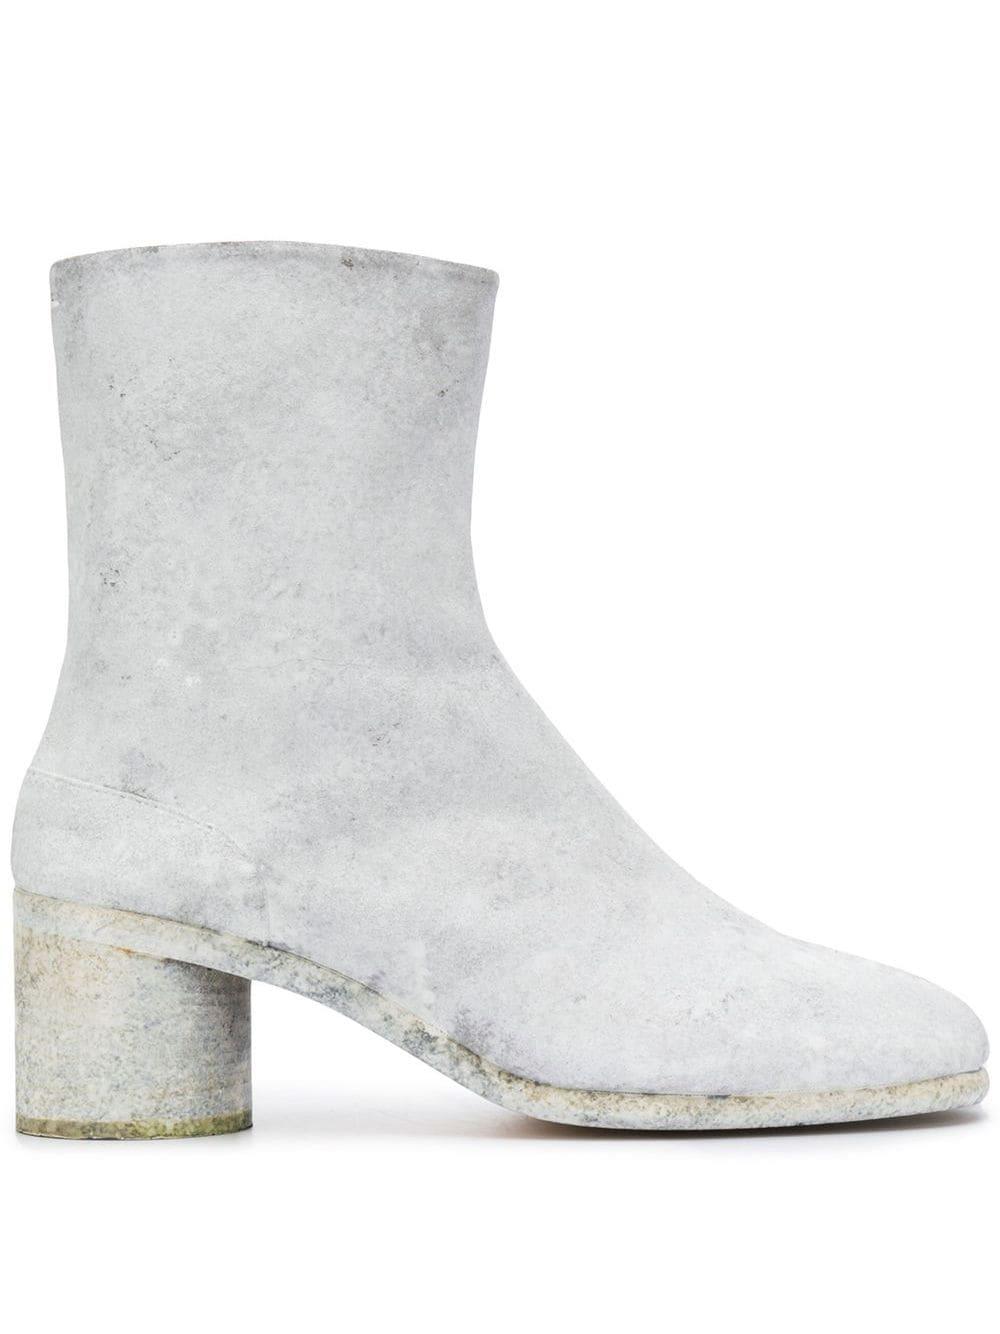 Maison Margiela Leather Tabi Ankle Boots in White for Men - Lyst